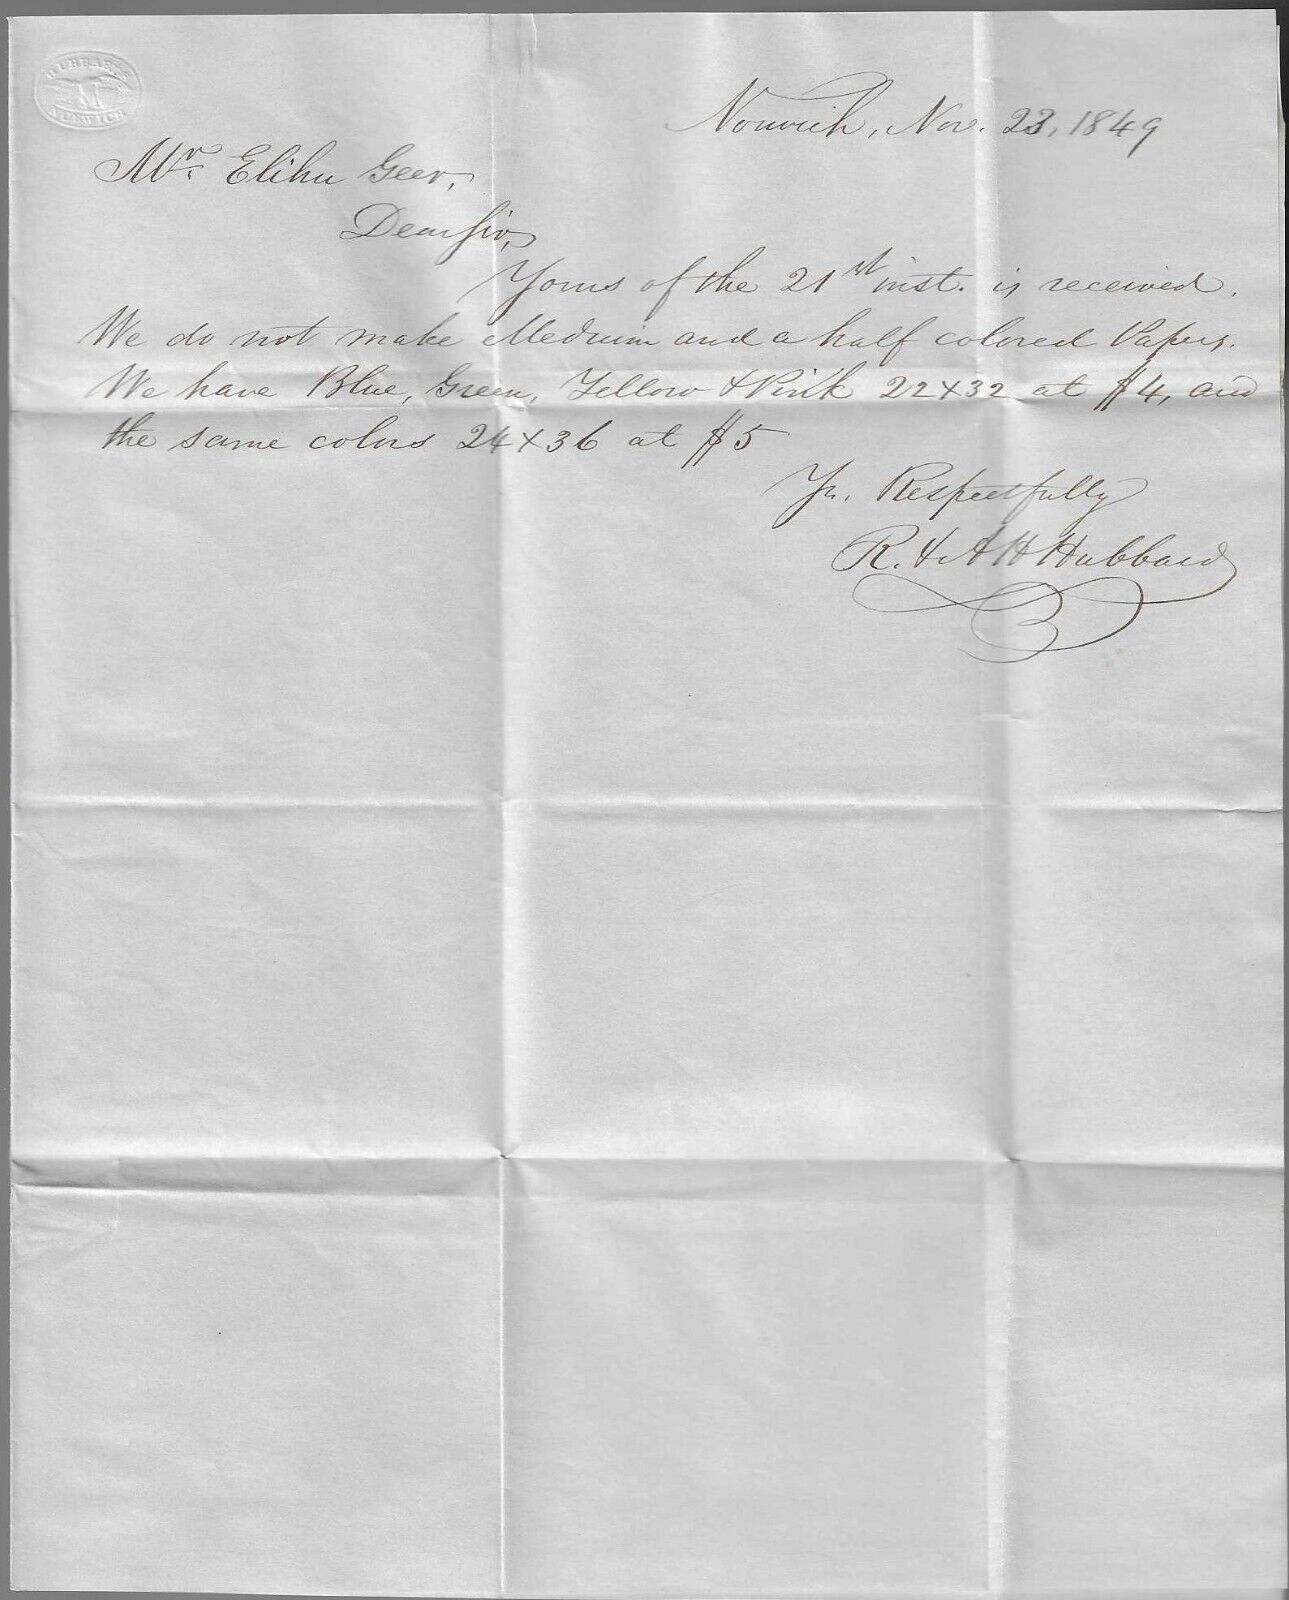 1849 Norwich CT Stampless Letter - Hubbard Paper Mill To Geer Of Hartford CT